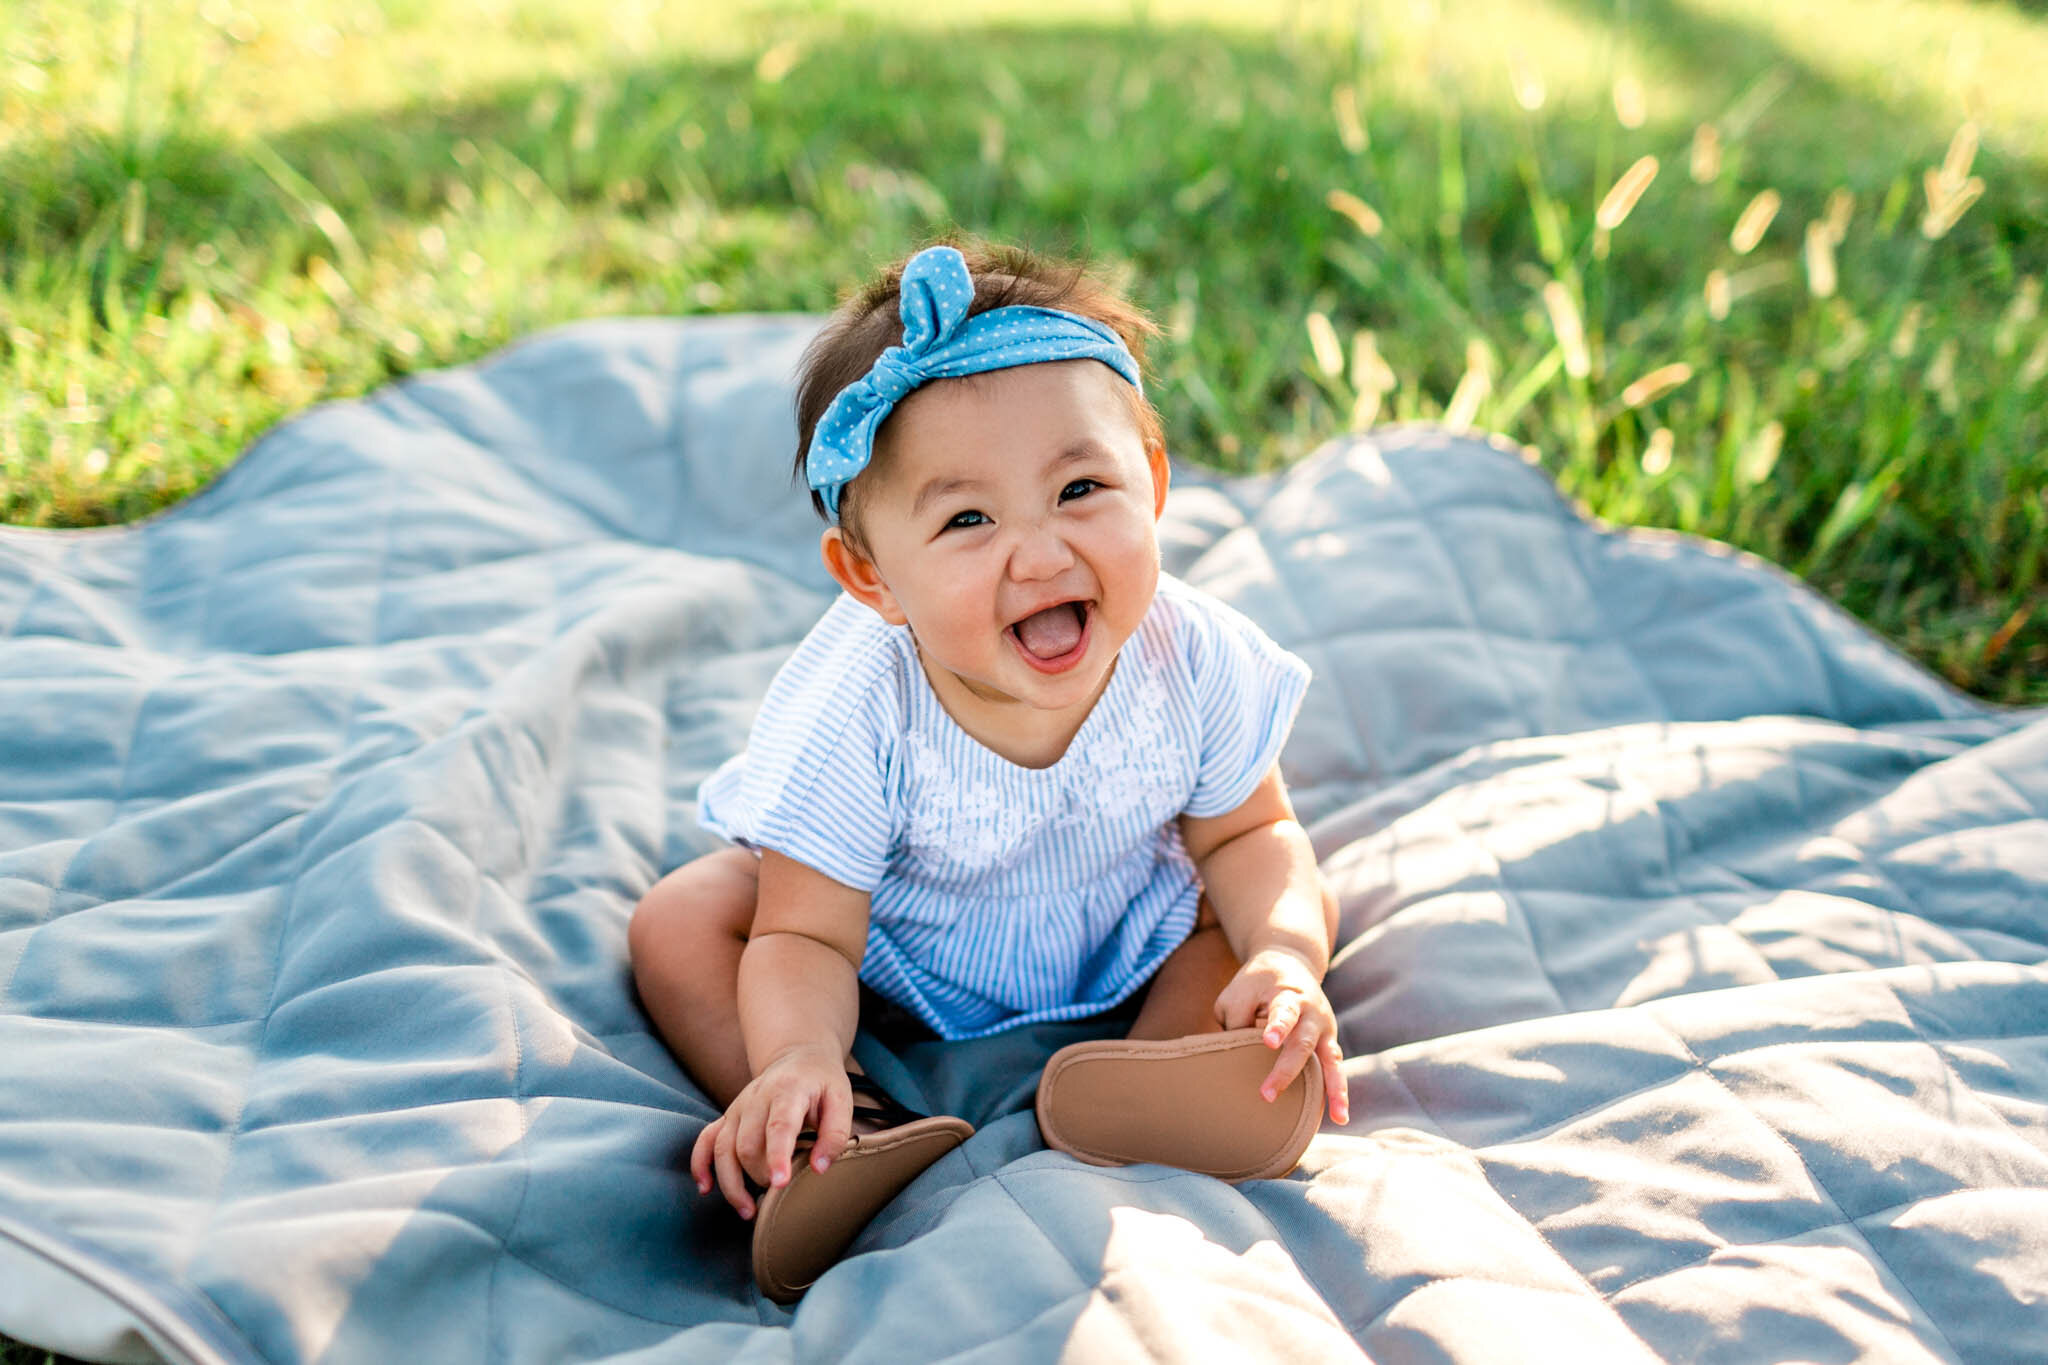 Raleigh Family Photographer | By G. Lin Photography | Baby girl smiling at camera and sitting on blanket